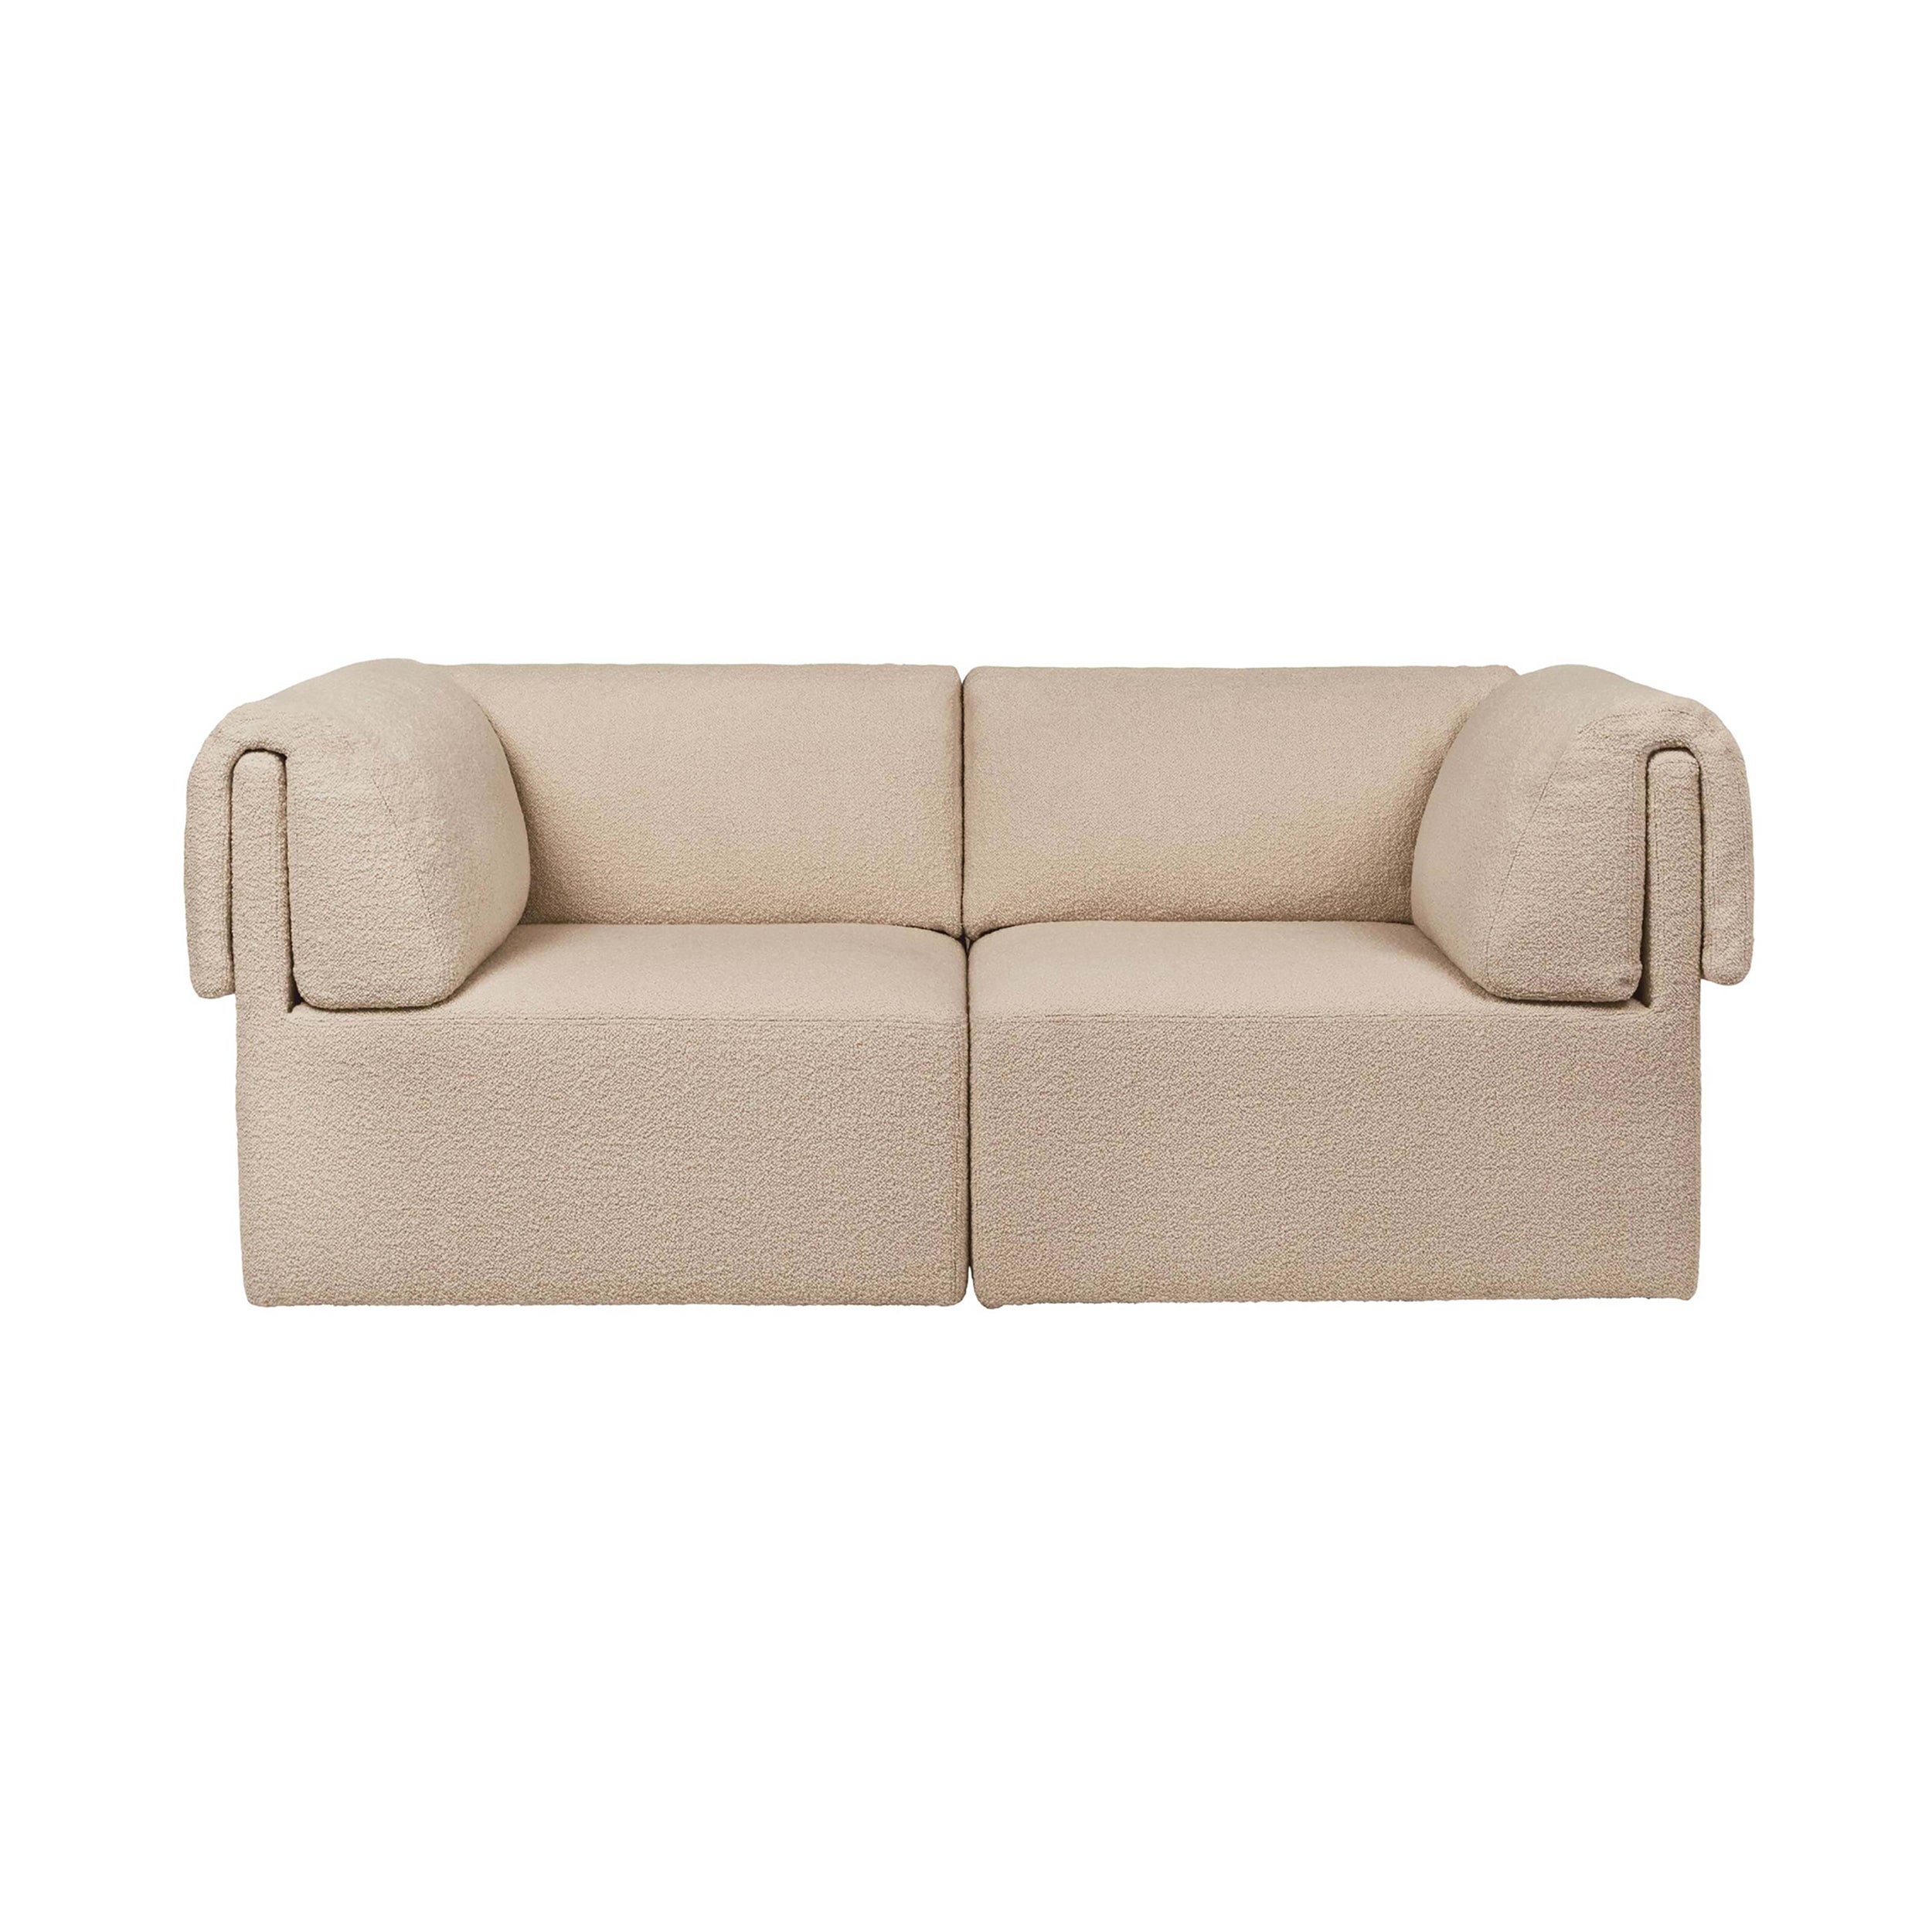 Wonder Sofa: 2 Seater + Fixed Cover